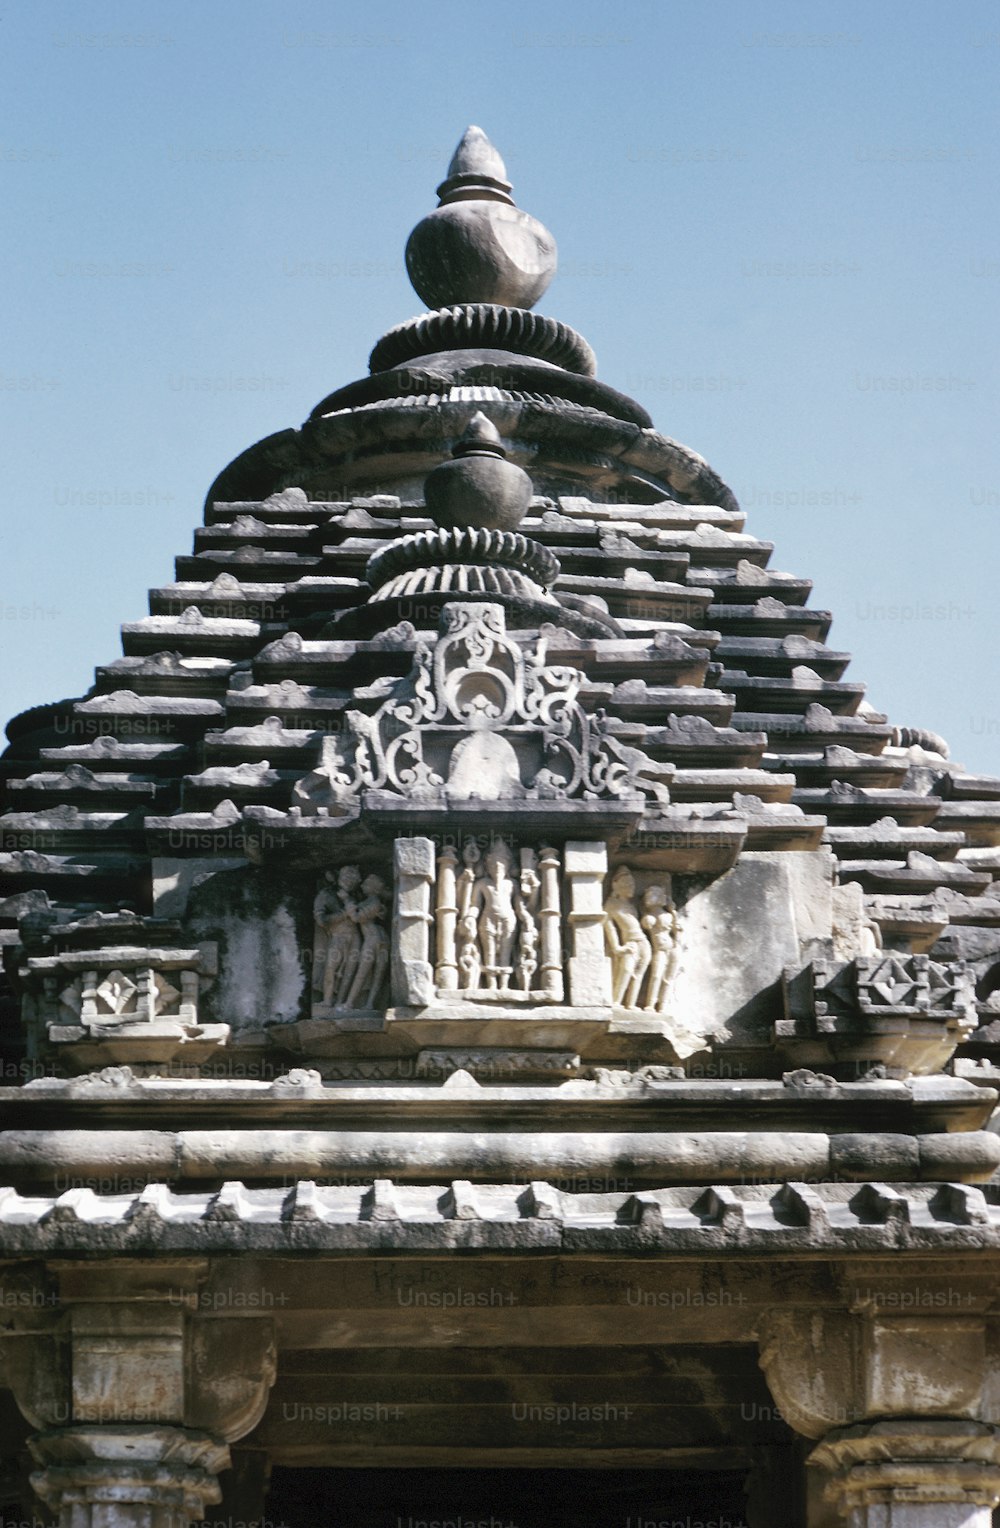 a large stone structure with sculptures on top of it